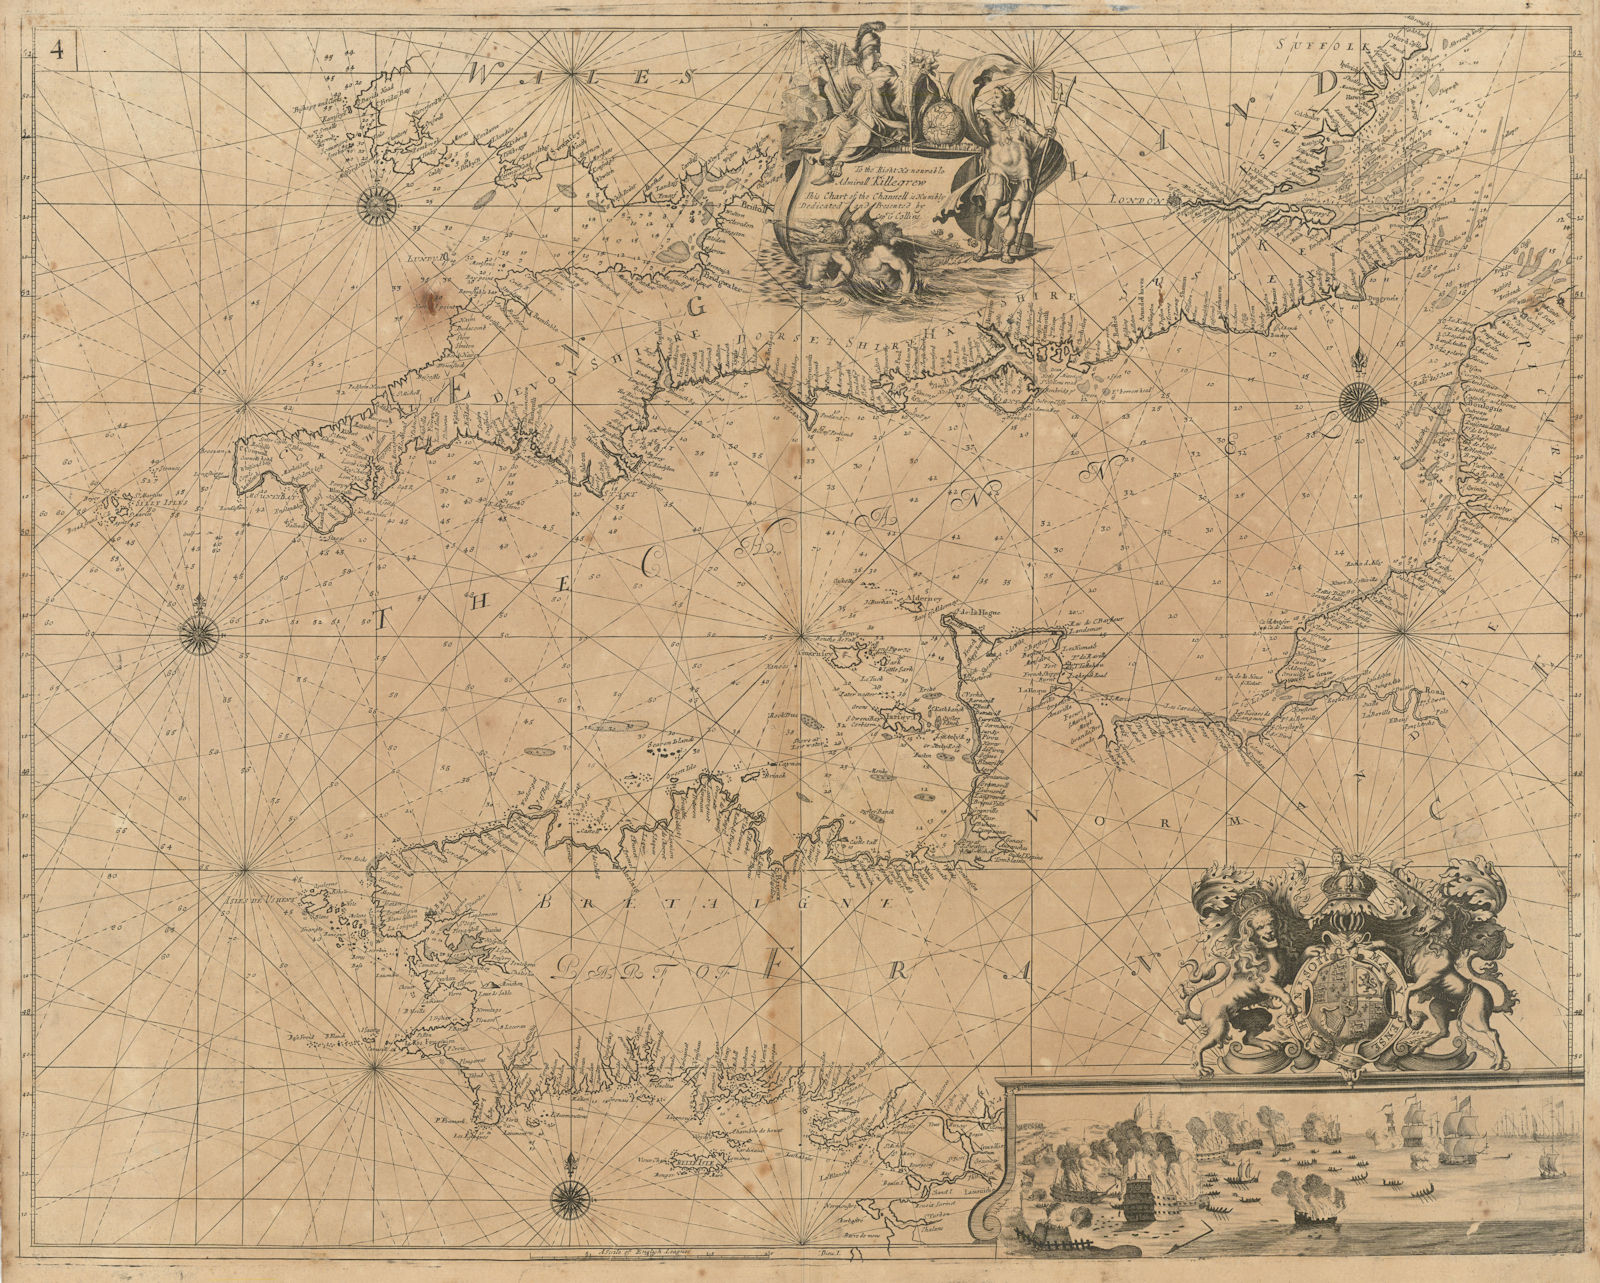 Associate Product English Channel. Southern England & Wales. Brittany Normandy. COLLINS 1693 map